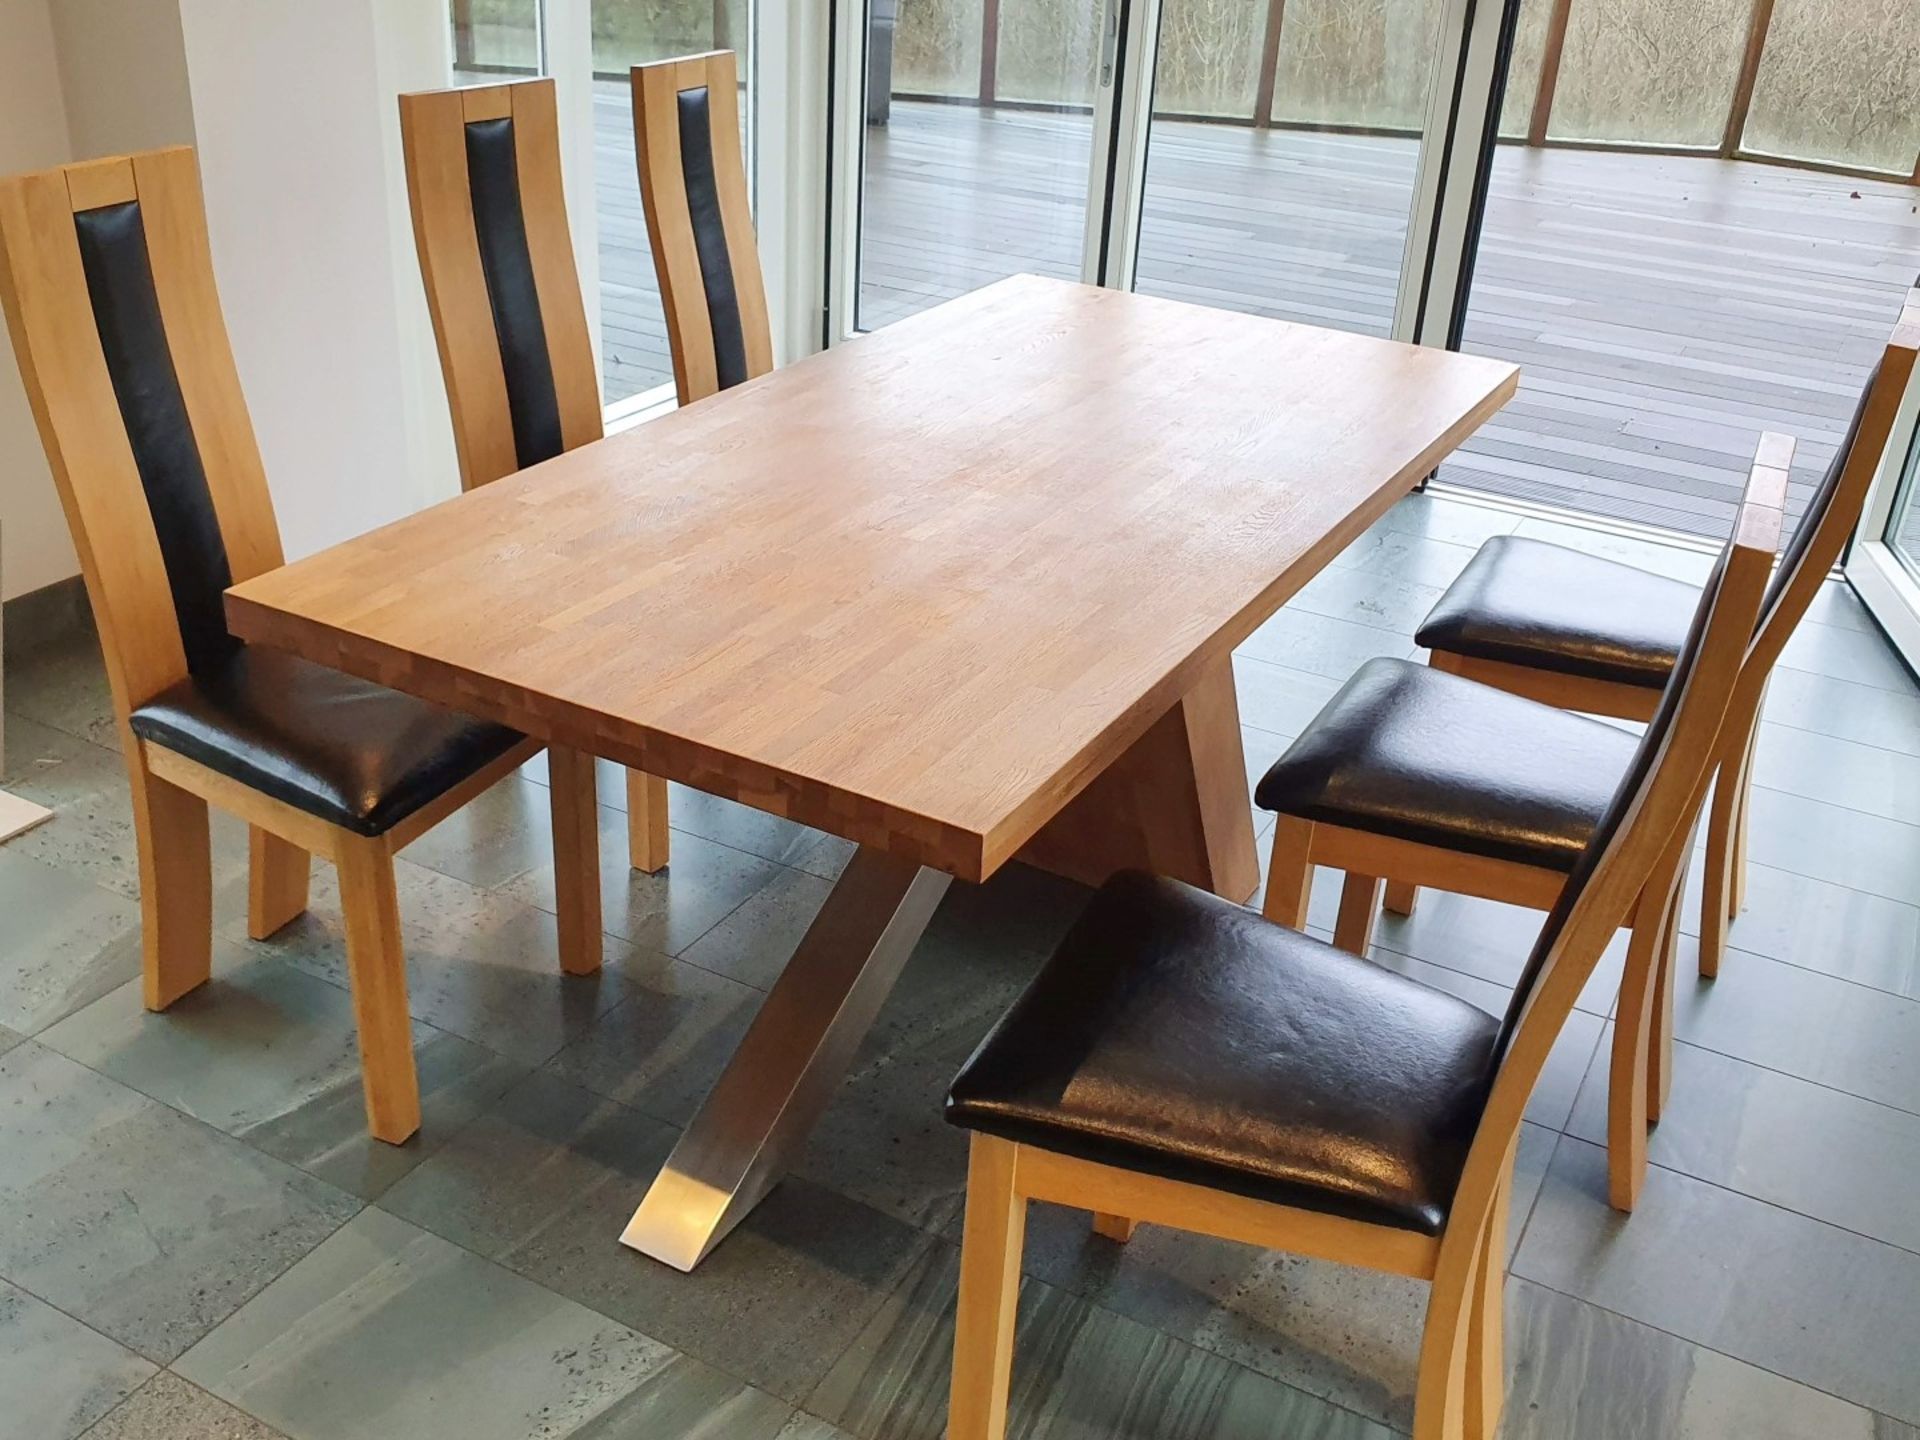 1 x Solid Oak 1.8 Metre Dining Table With 6 x High Back Dining Chairs - Pre-owned In Great Condition - Image 8 of 12